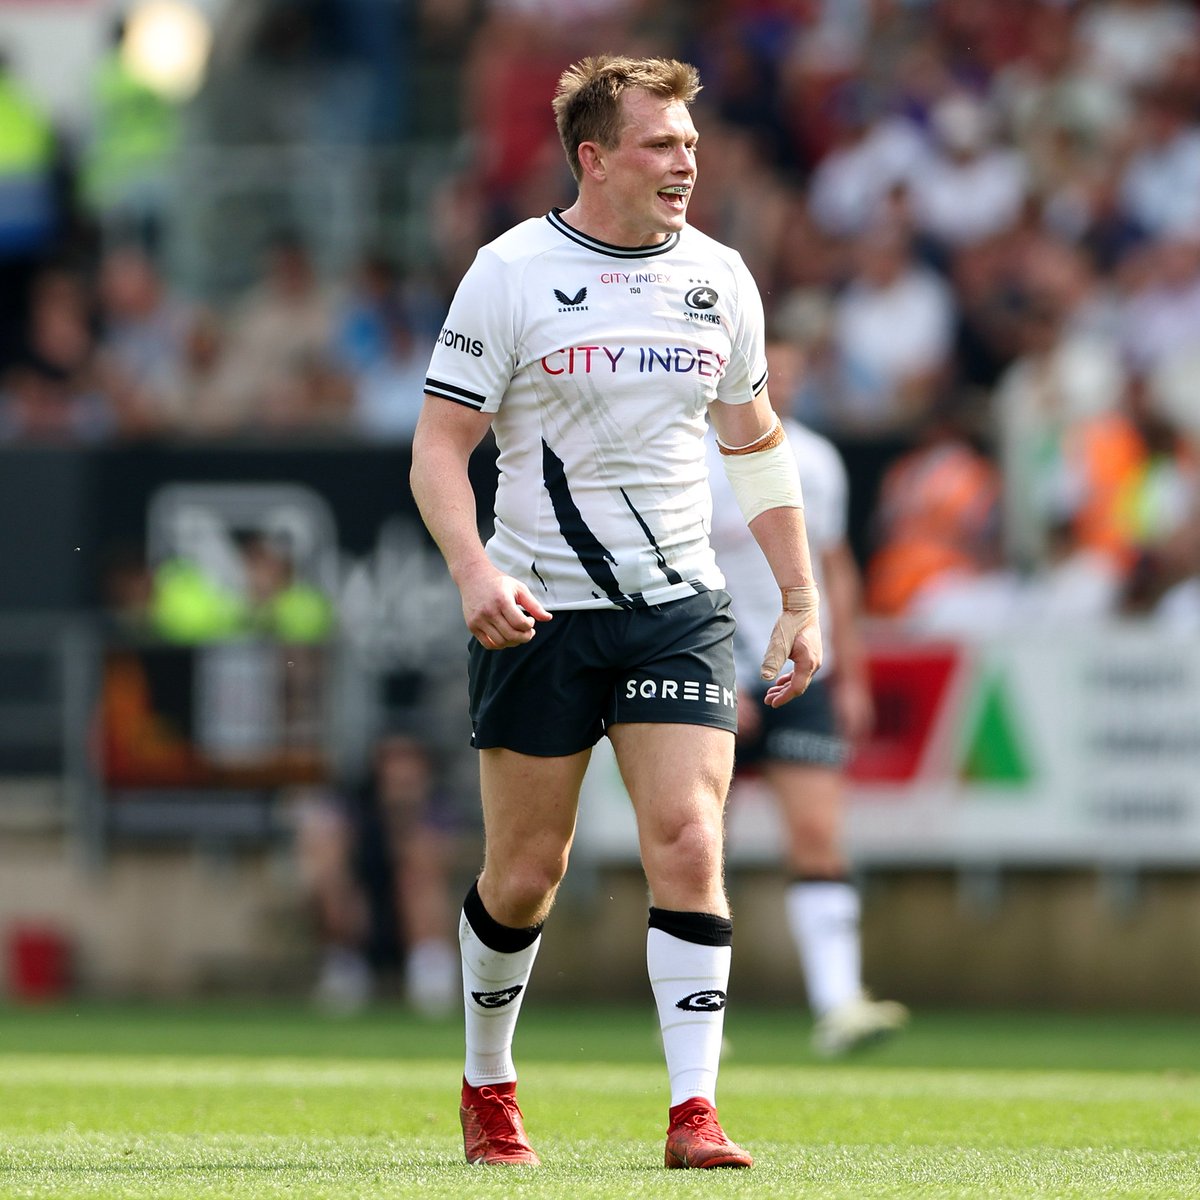 𝗠𝗿. 𝗦𝘁𝗲𝗮𝗹 𝗬𝗼𝘂𝗿 𝗕𝗮𝗹𝗹 ™️ Most turnovers (3) in Round 17 of @premrugby courtesy of Nick Tompkins. #YourSaracens💫